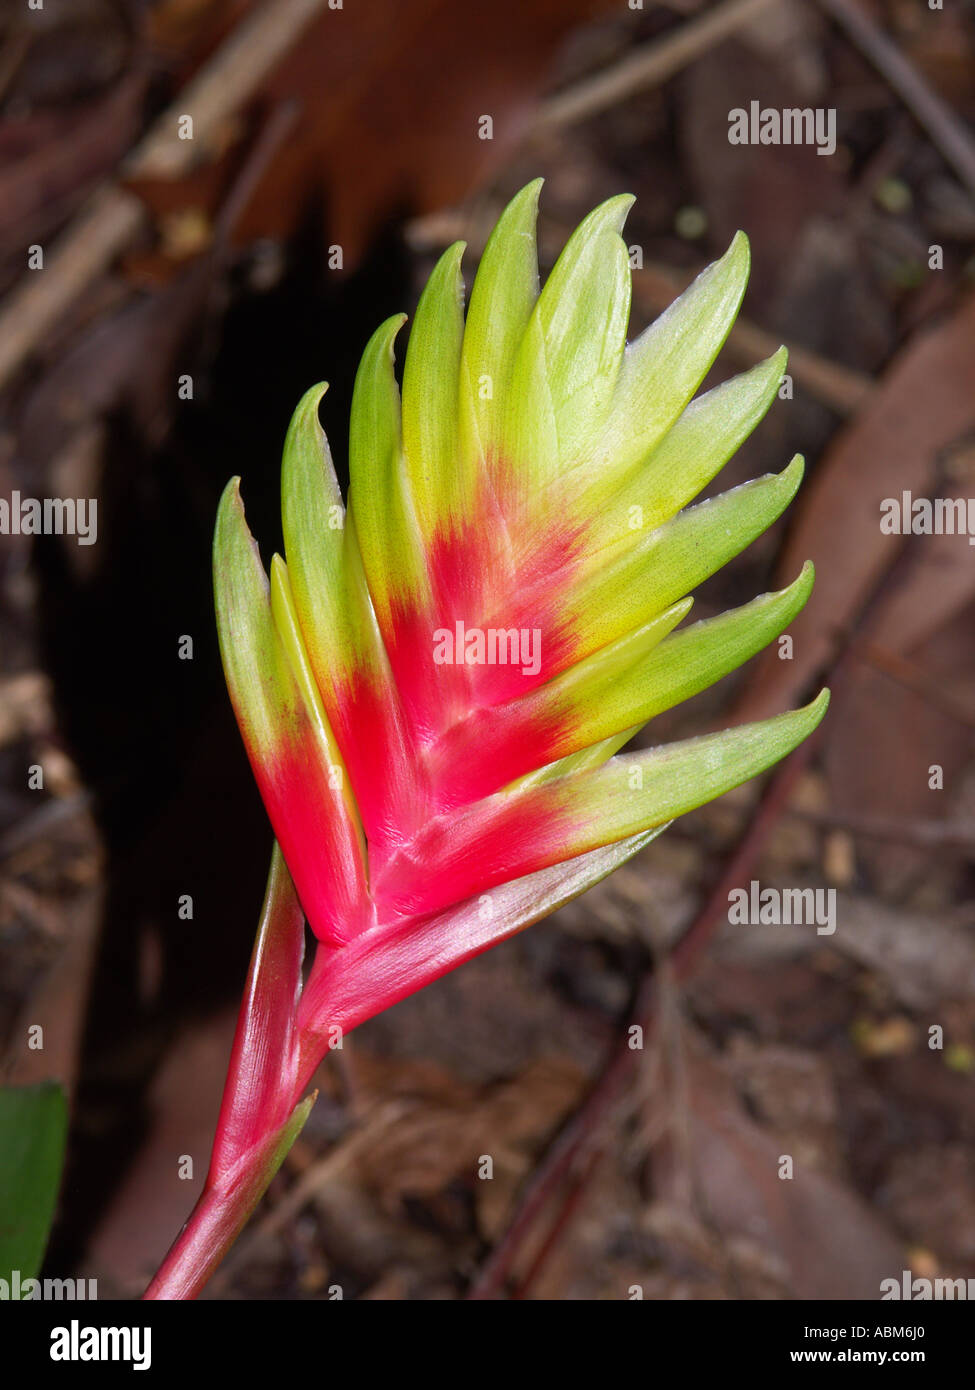 Flower of Vriesia carinata, a member of the Bromeliad family of plants that is indigenous to South America Stock Photo